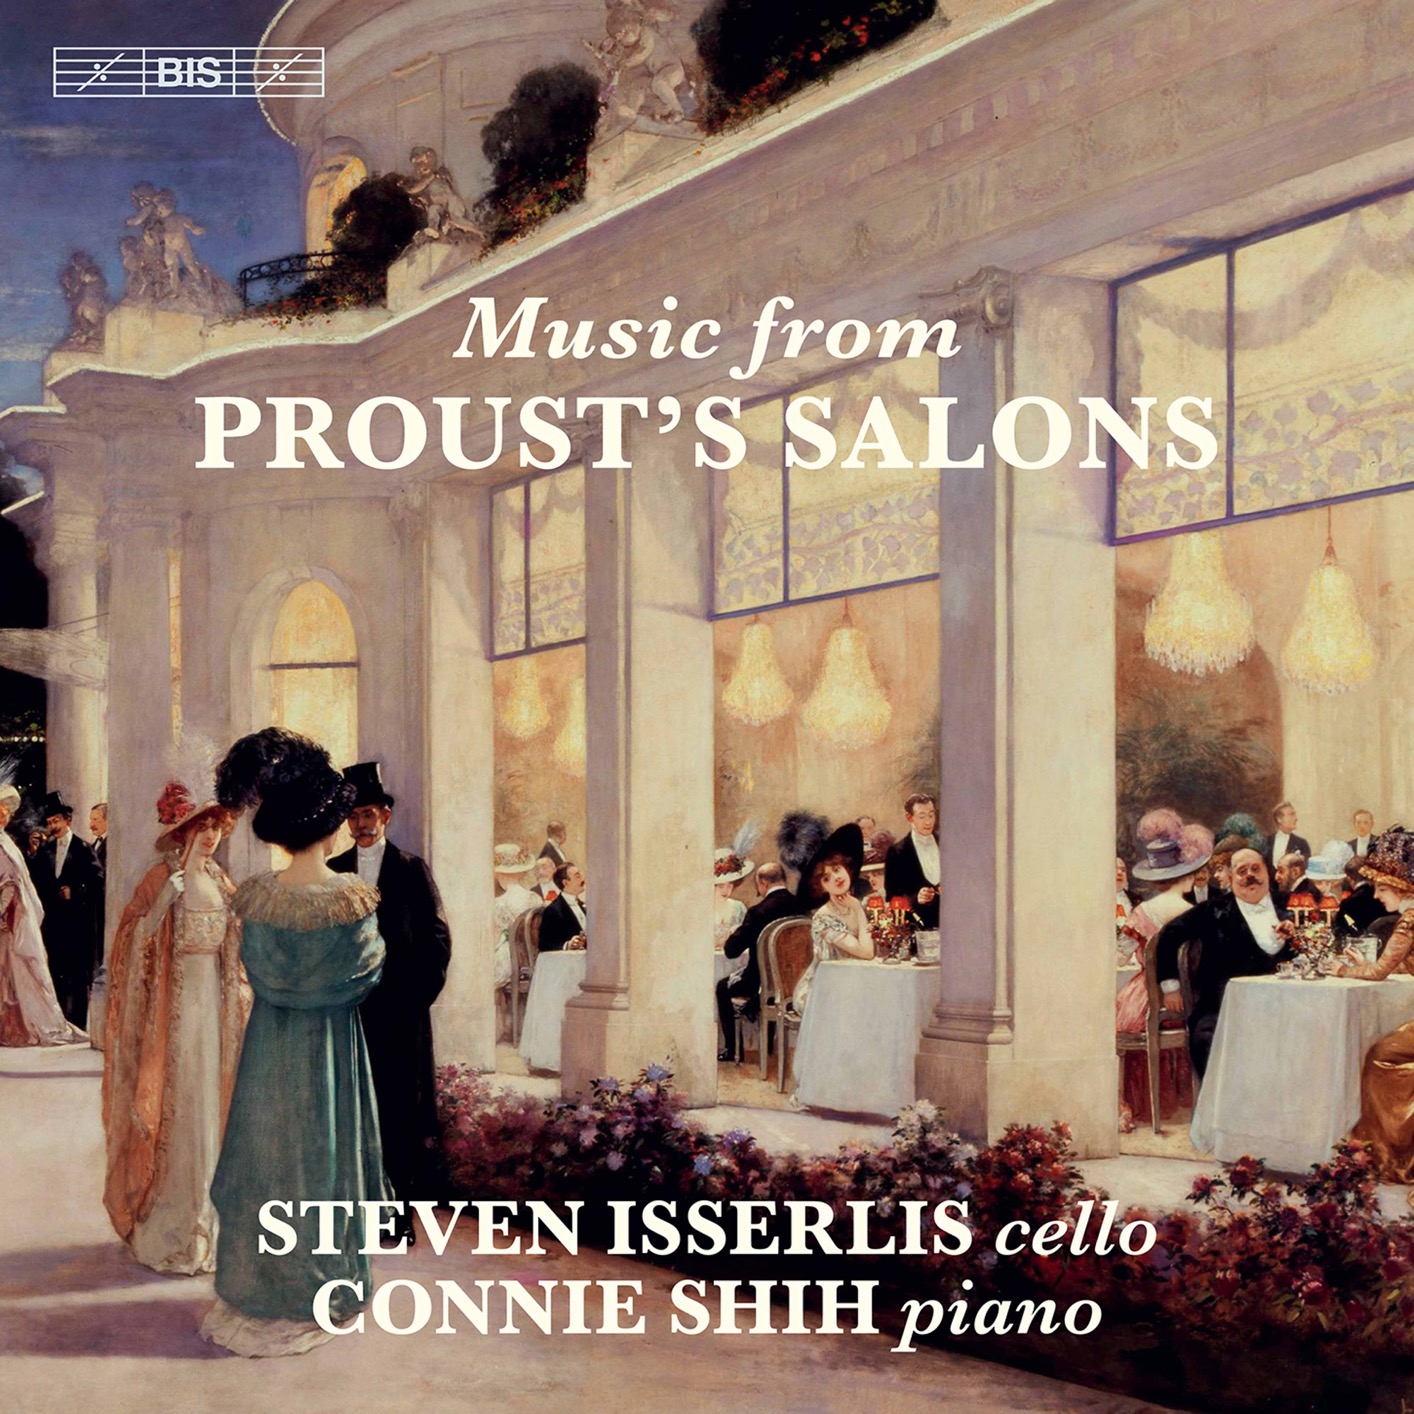 Steven Isserlis & Connie Shih - Cello Music from Proust’s Salons (2021) [FLAC 24bit/96kHz]